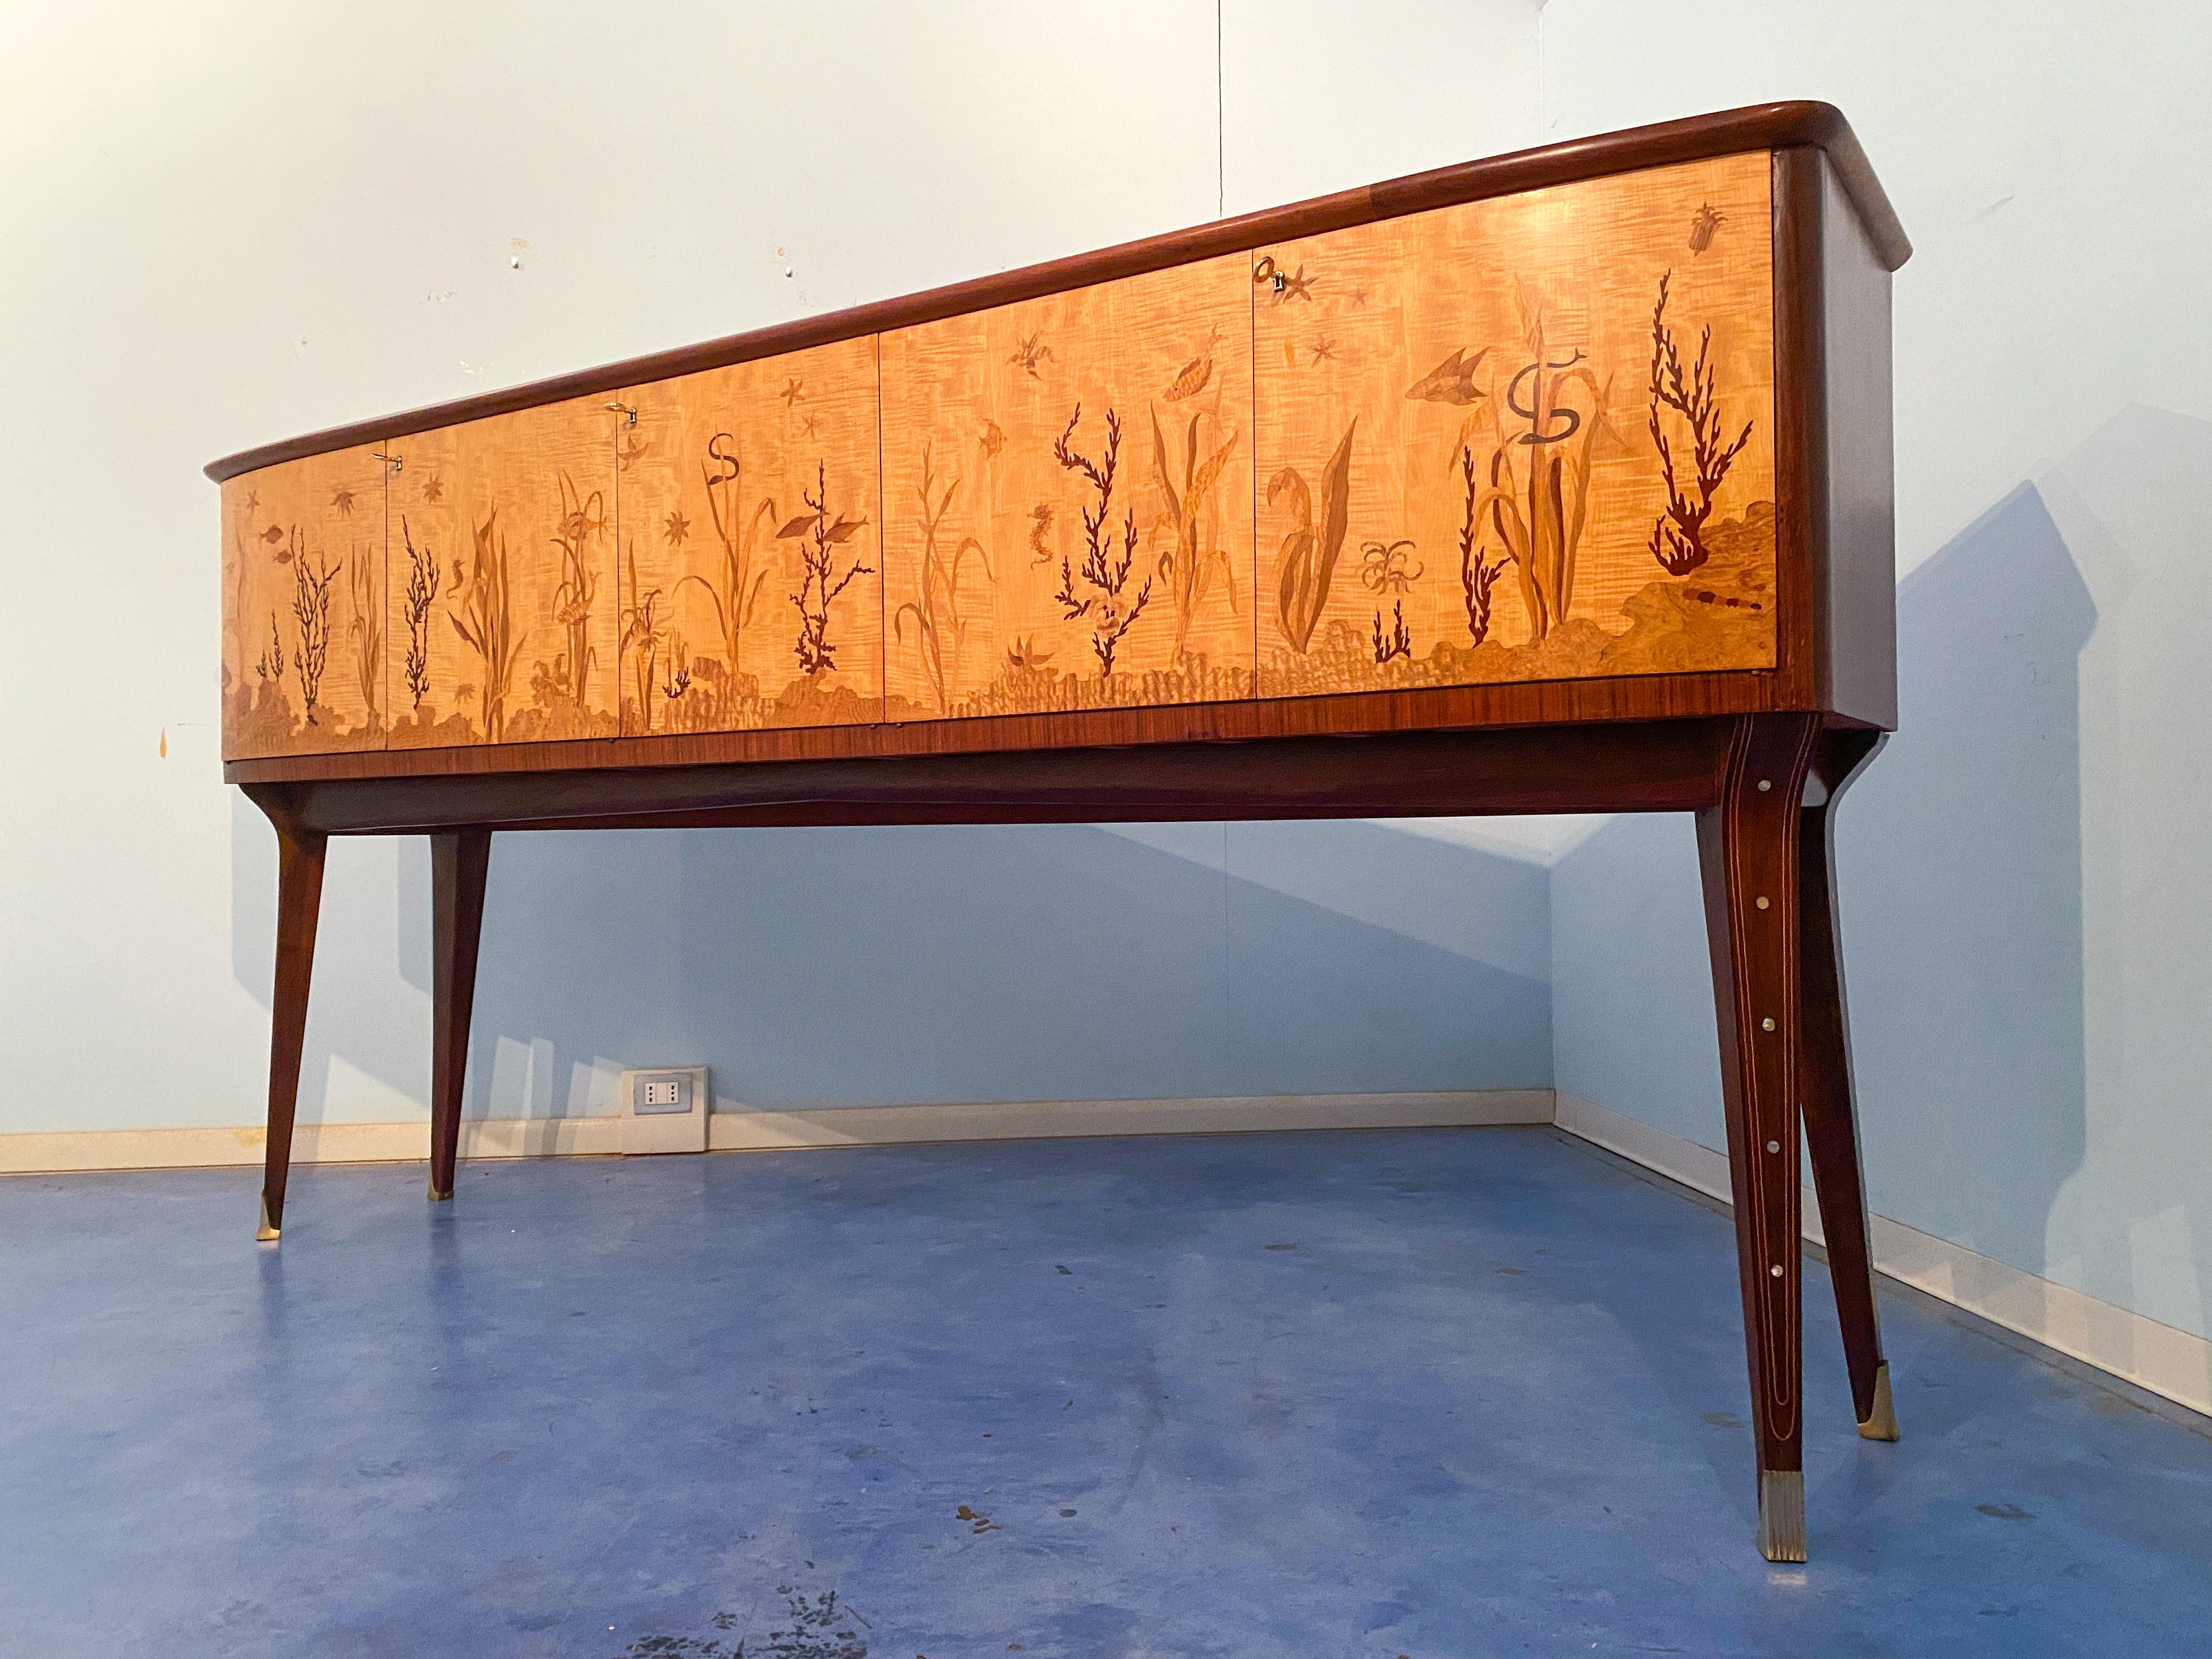 Italian Midcentury Inlaid Maple Sideboard by Andrea Gusmai, 1950s For Sale 8